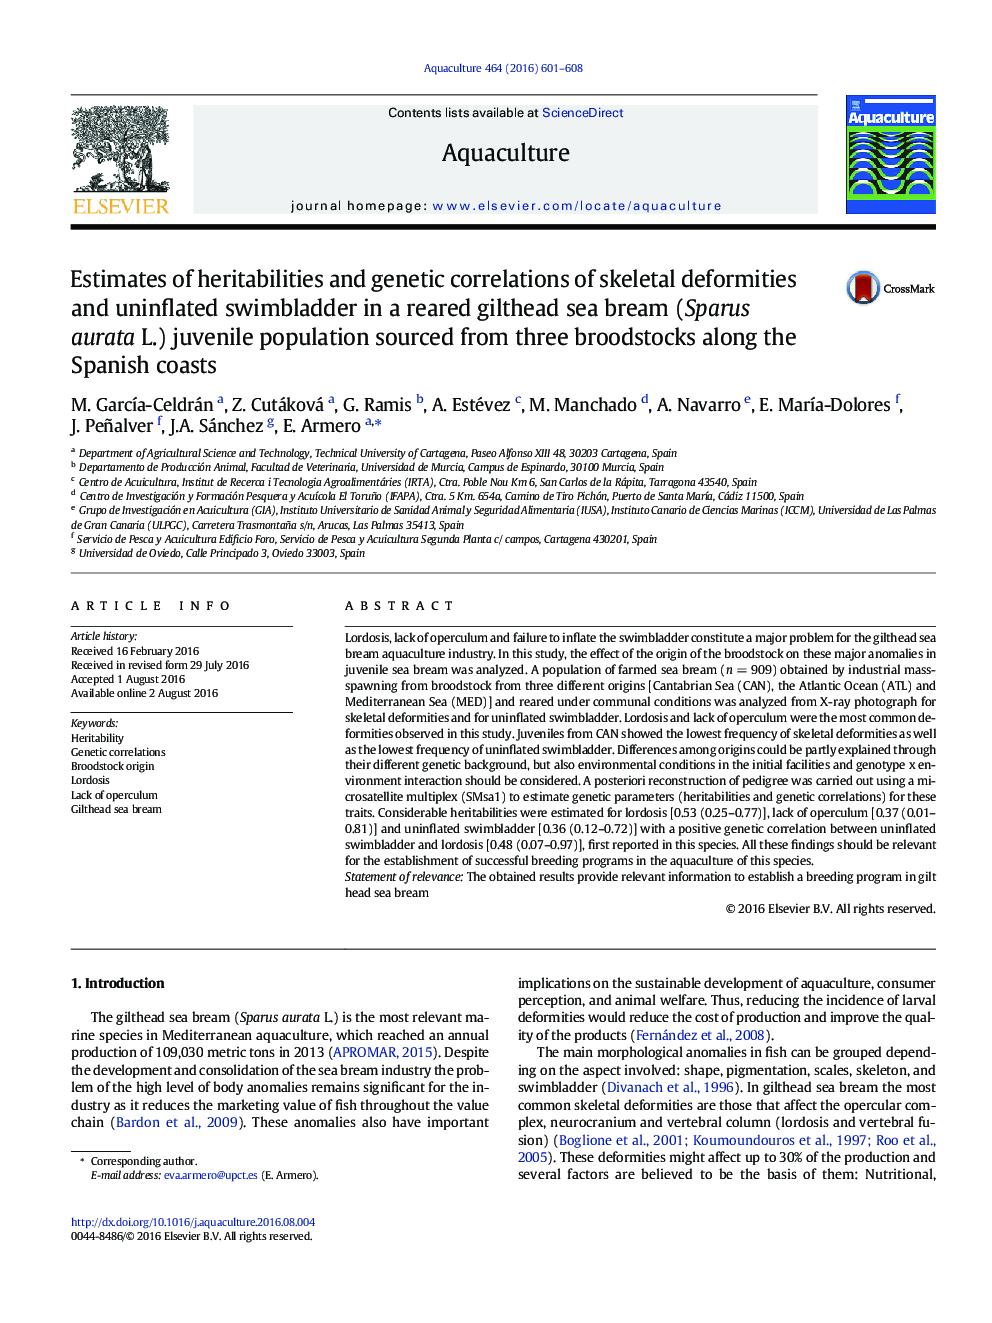 Estimates of heritabilities and genetic correlations of skeletal deformities and uninflated swimbladder in a reared gilthead sea bream (Sparus aurata L.) juvenile population sourced from three broodstocks along the Spanish coasts